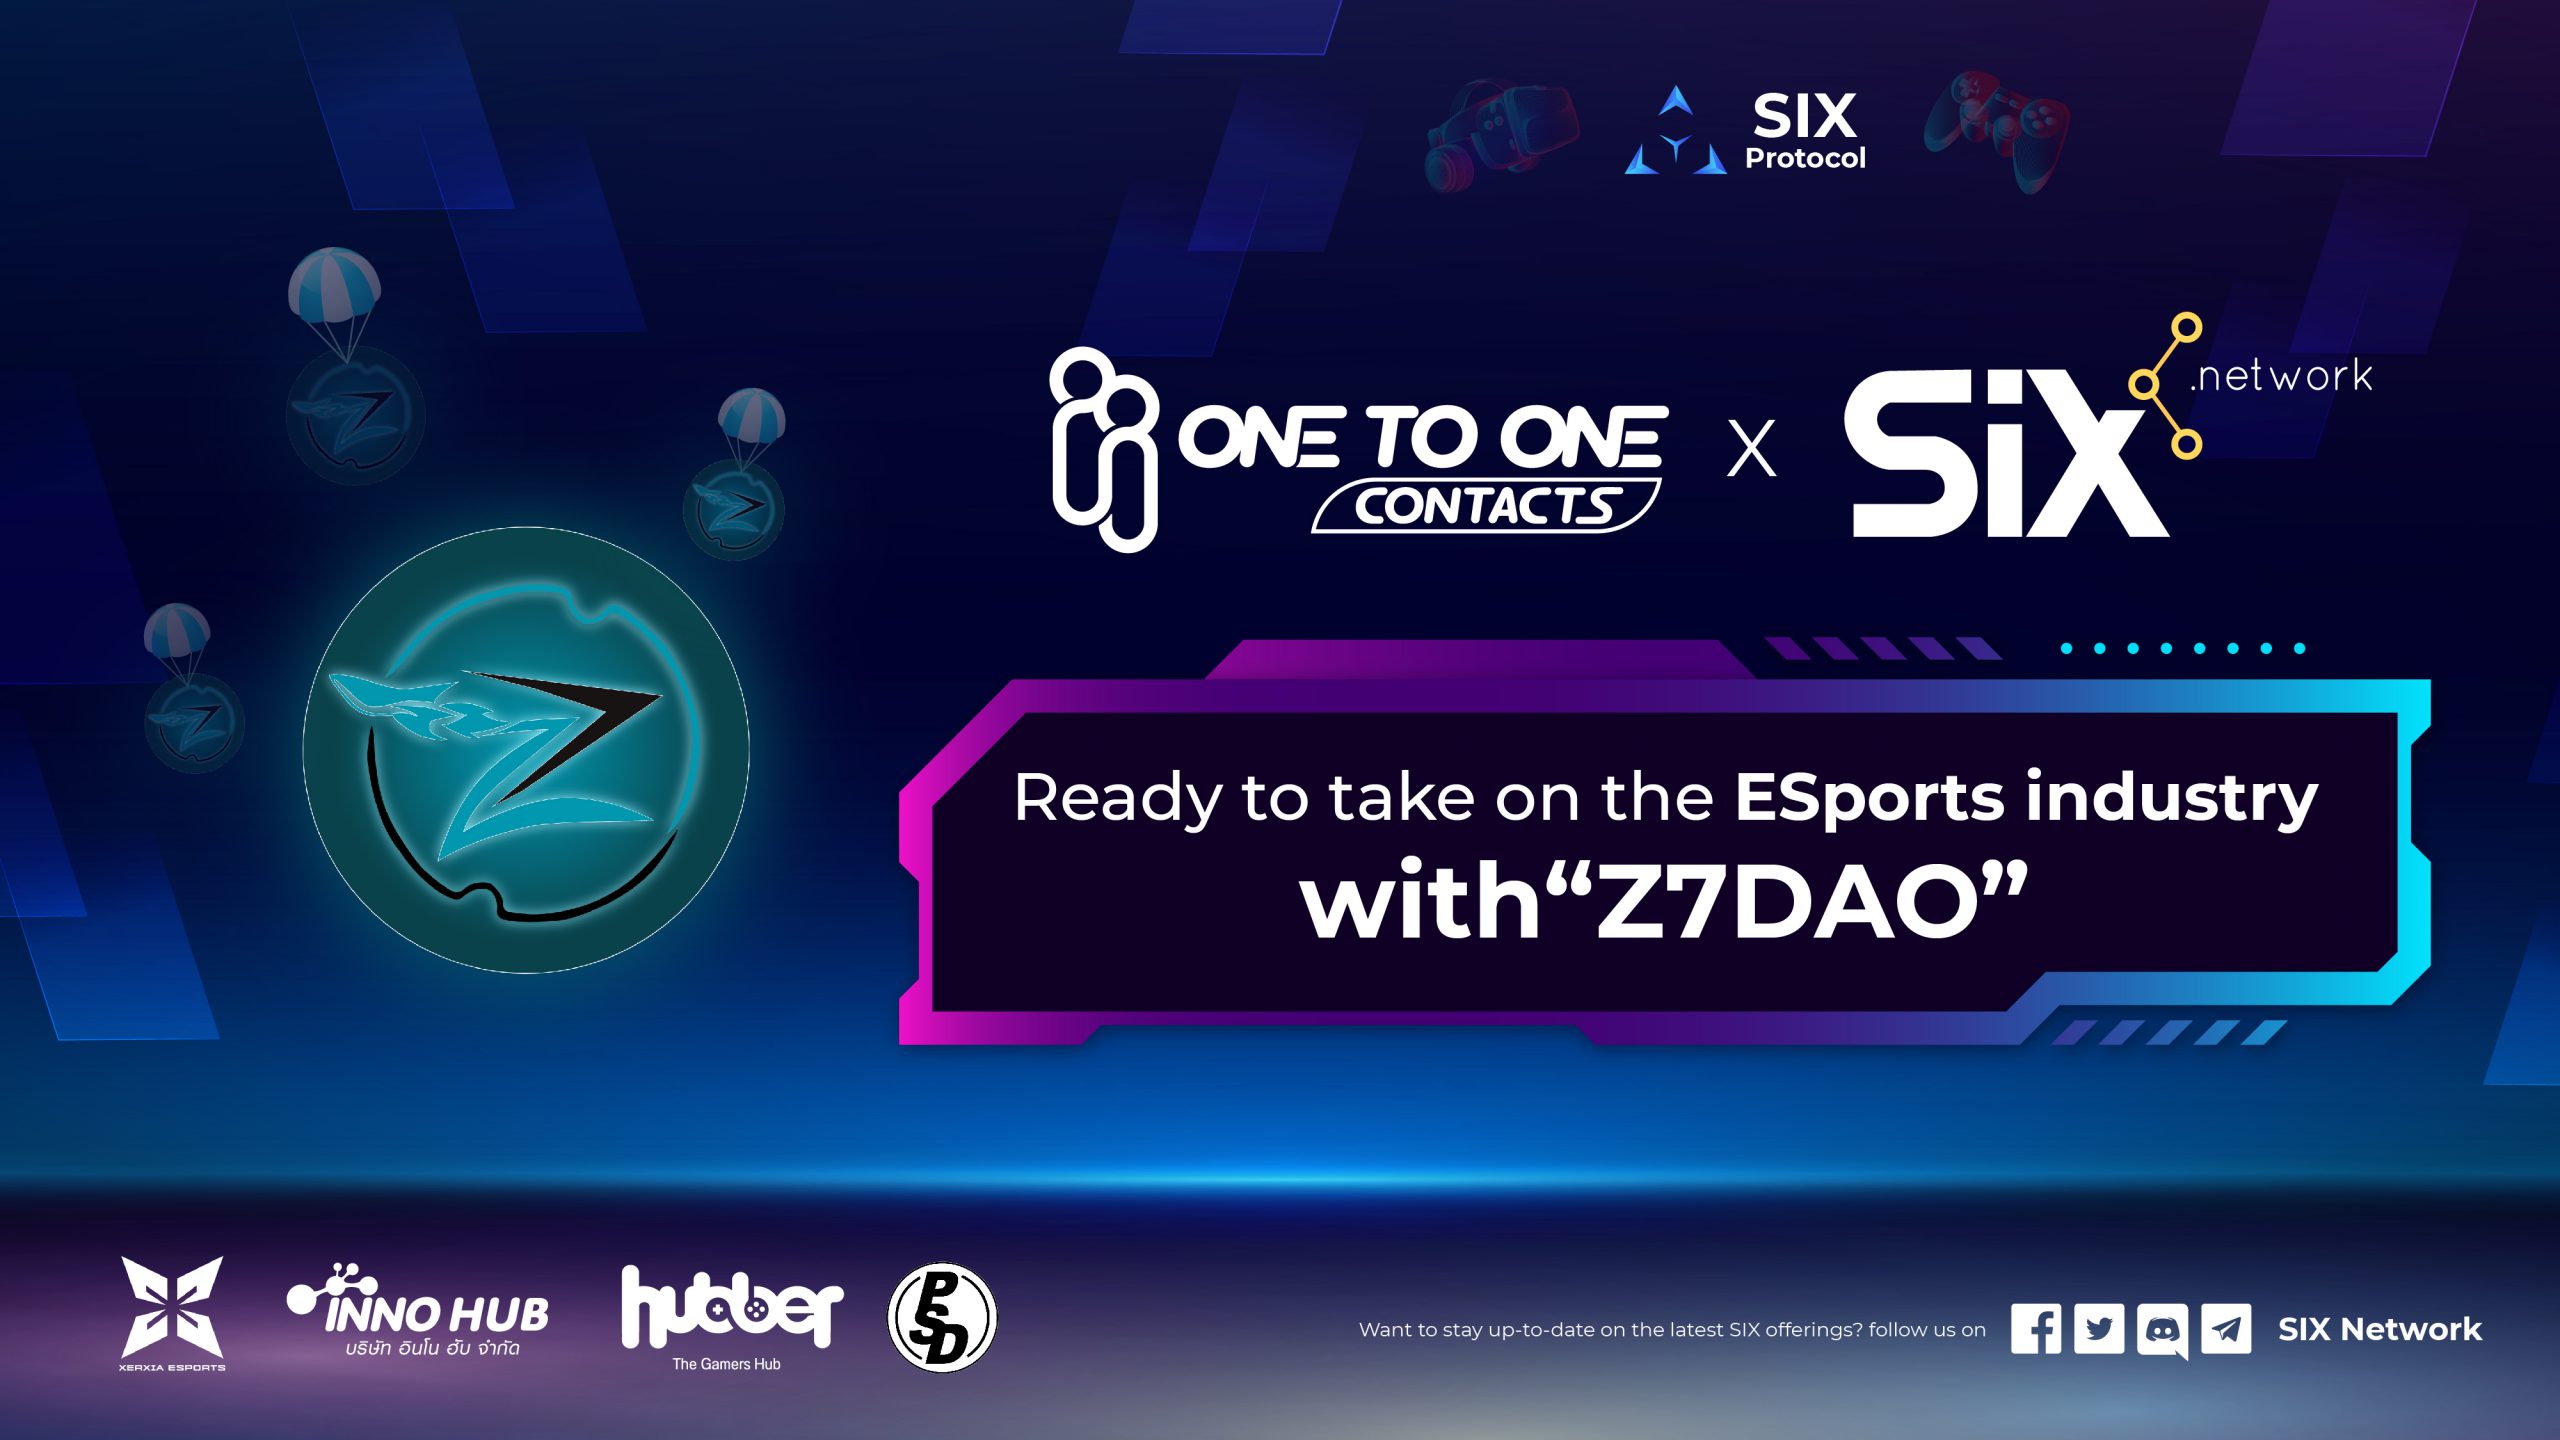 OTO’s subsidiary, PSD, joins hands with SIX Network, ready to launch Z7DAO with the “Esports team” Platform. Connecting Gaming Ecosystem To Be Launched This 22nd July 2022